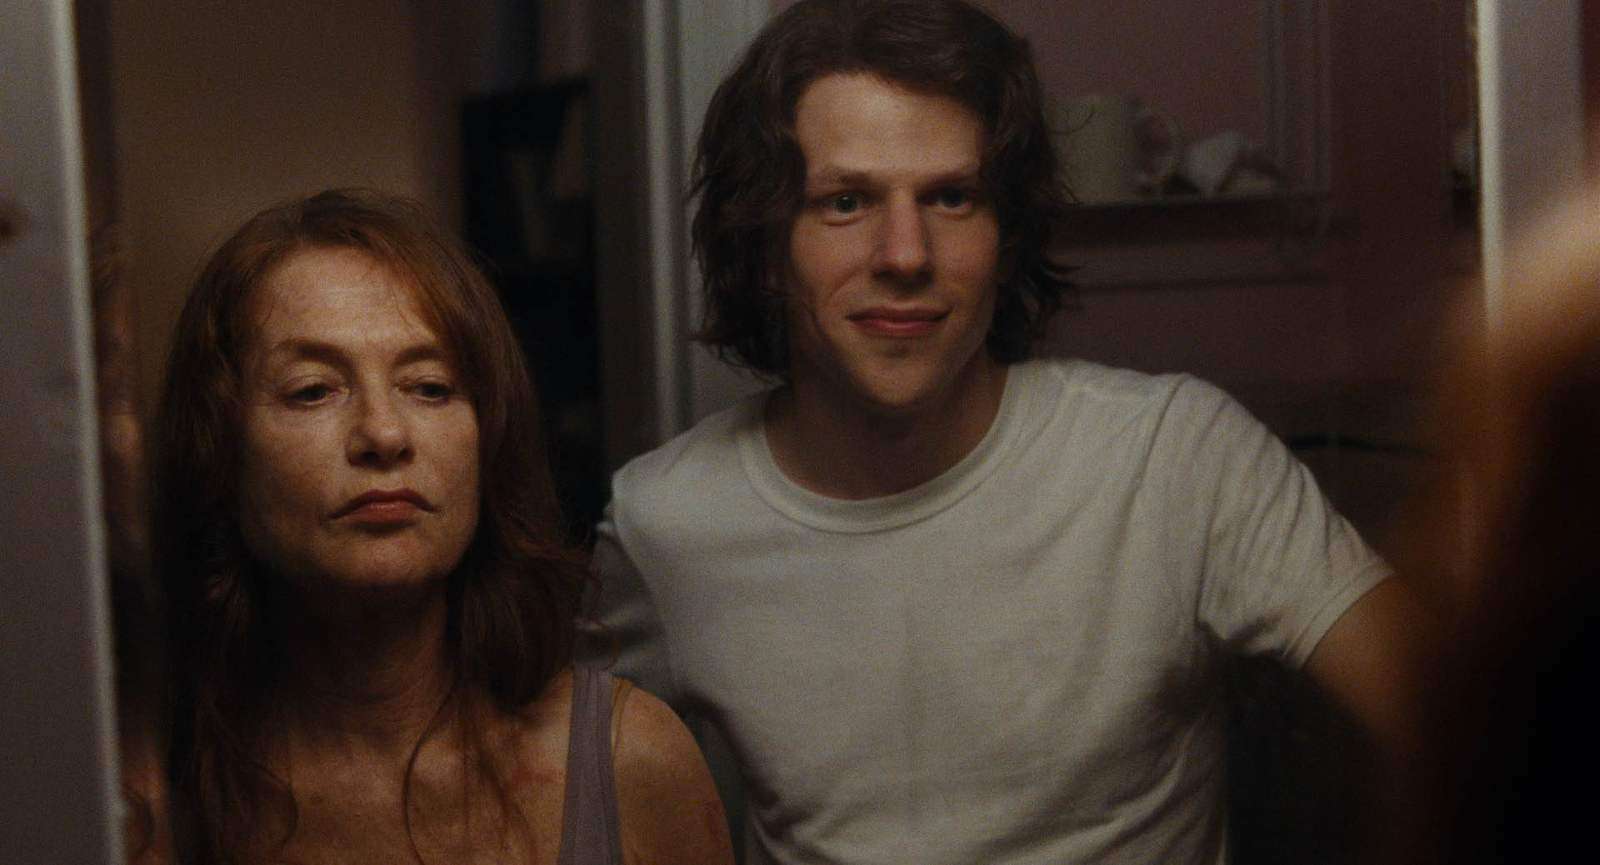 Isabelle Huppert as Isabelle and Jesse Eisenberg as Jonah in Louder Than Bombs, courtesy of The Orchard. This is the film for which we first heard Trier use the term 'dirty formalism' to describe his work. Trier used the term 'dirty formalism' to describe his approach to Louder Than Bombs.